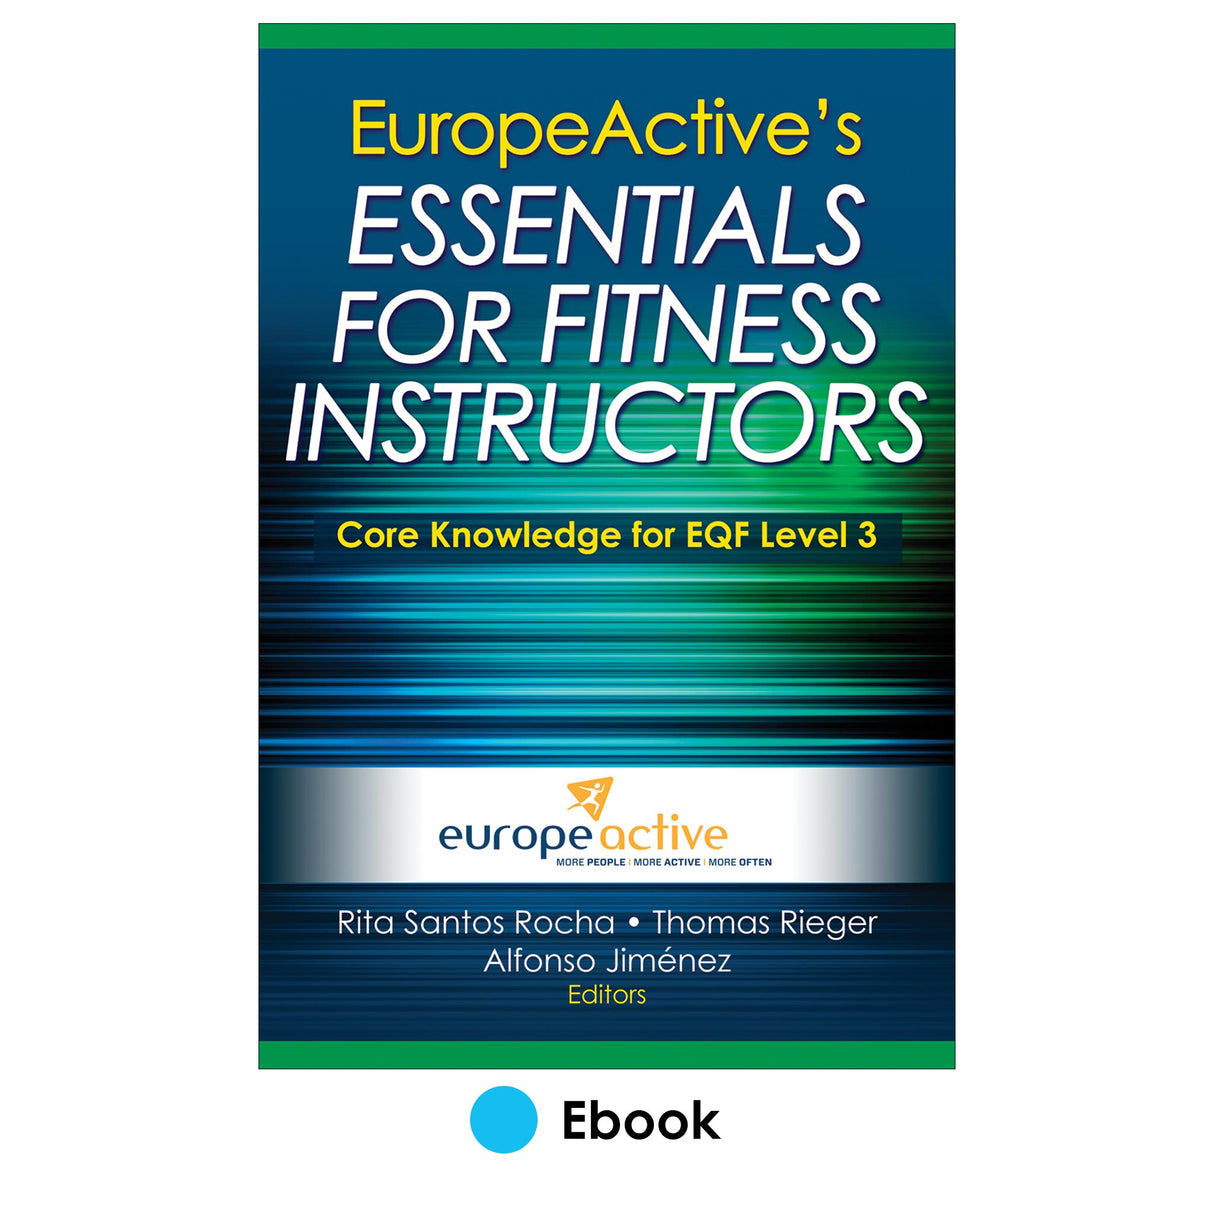 Europe Active's Essentials for Fitness Instructors PDF